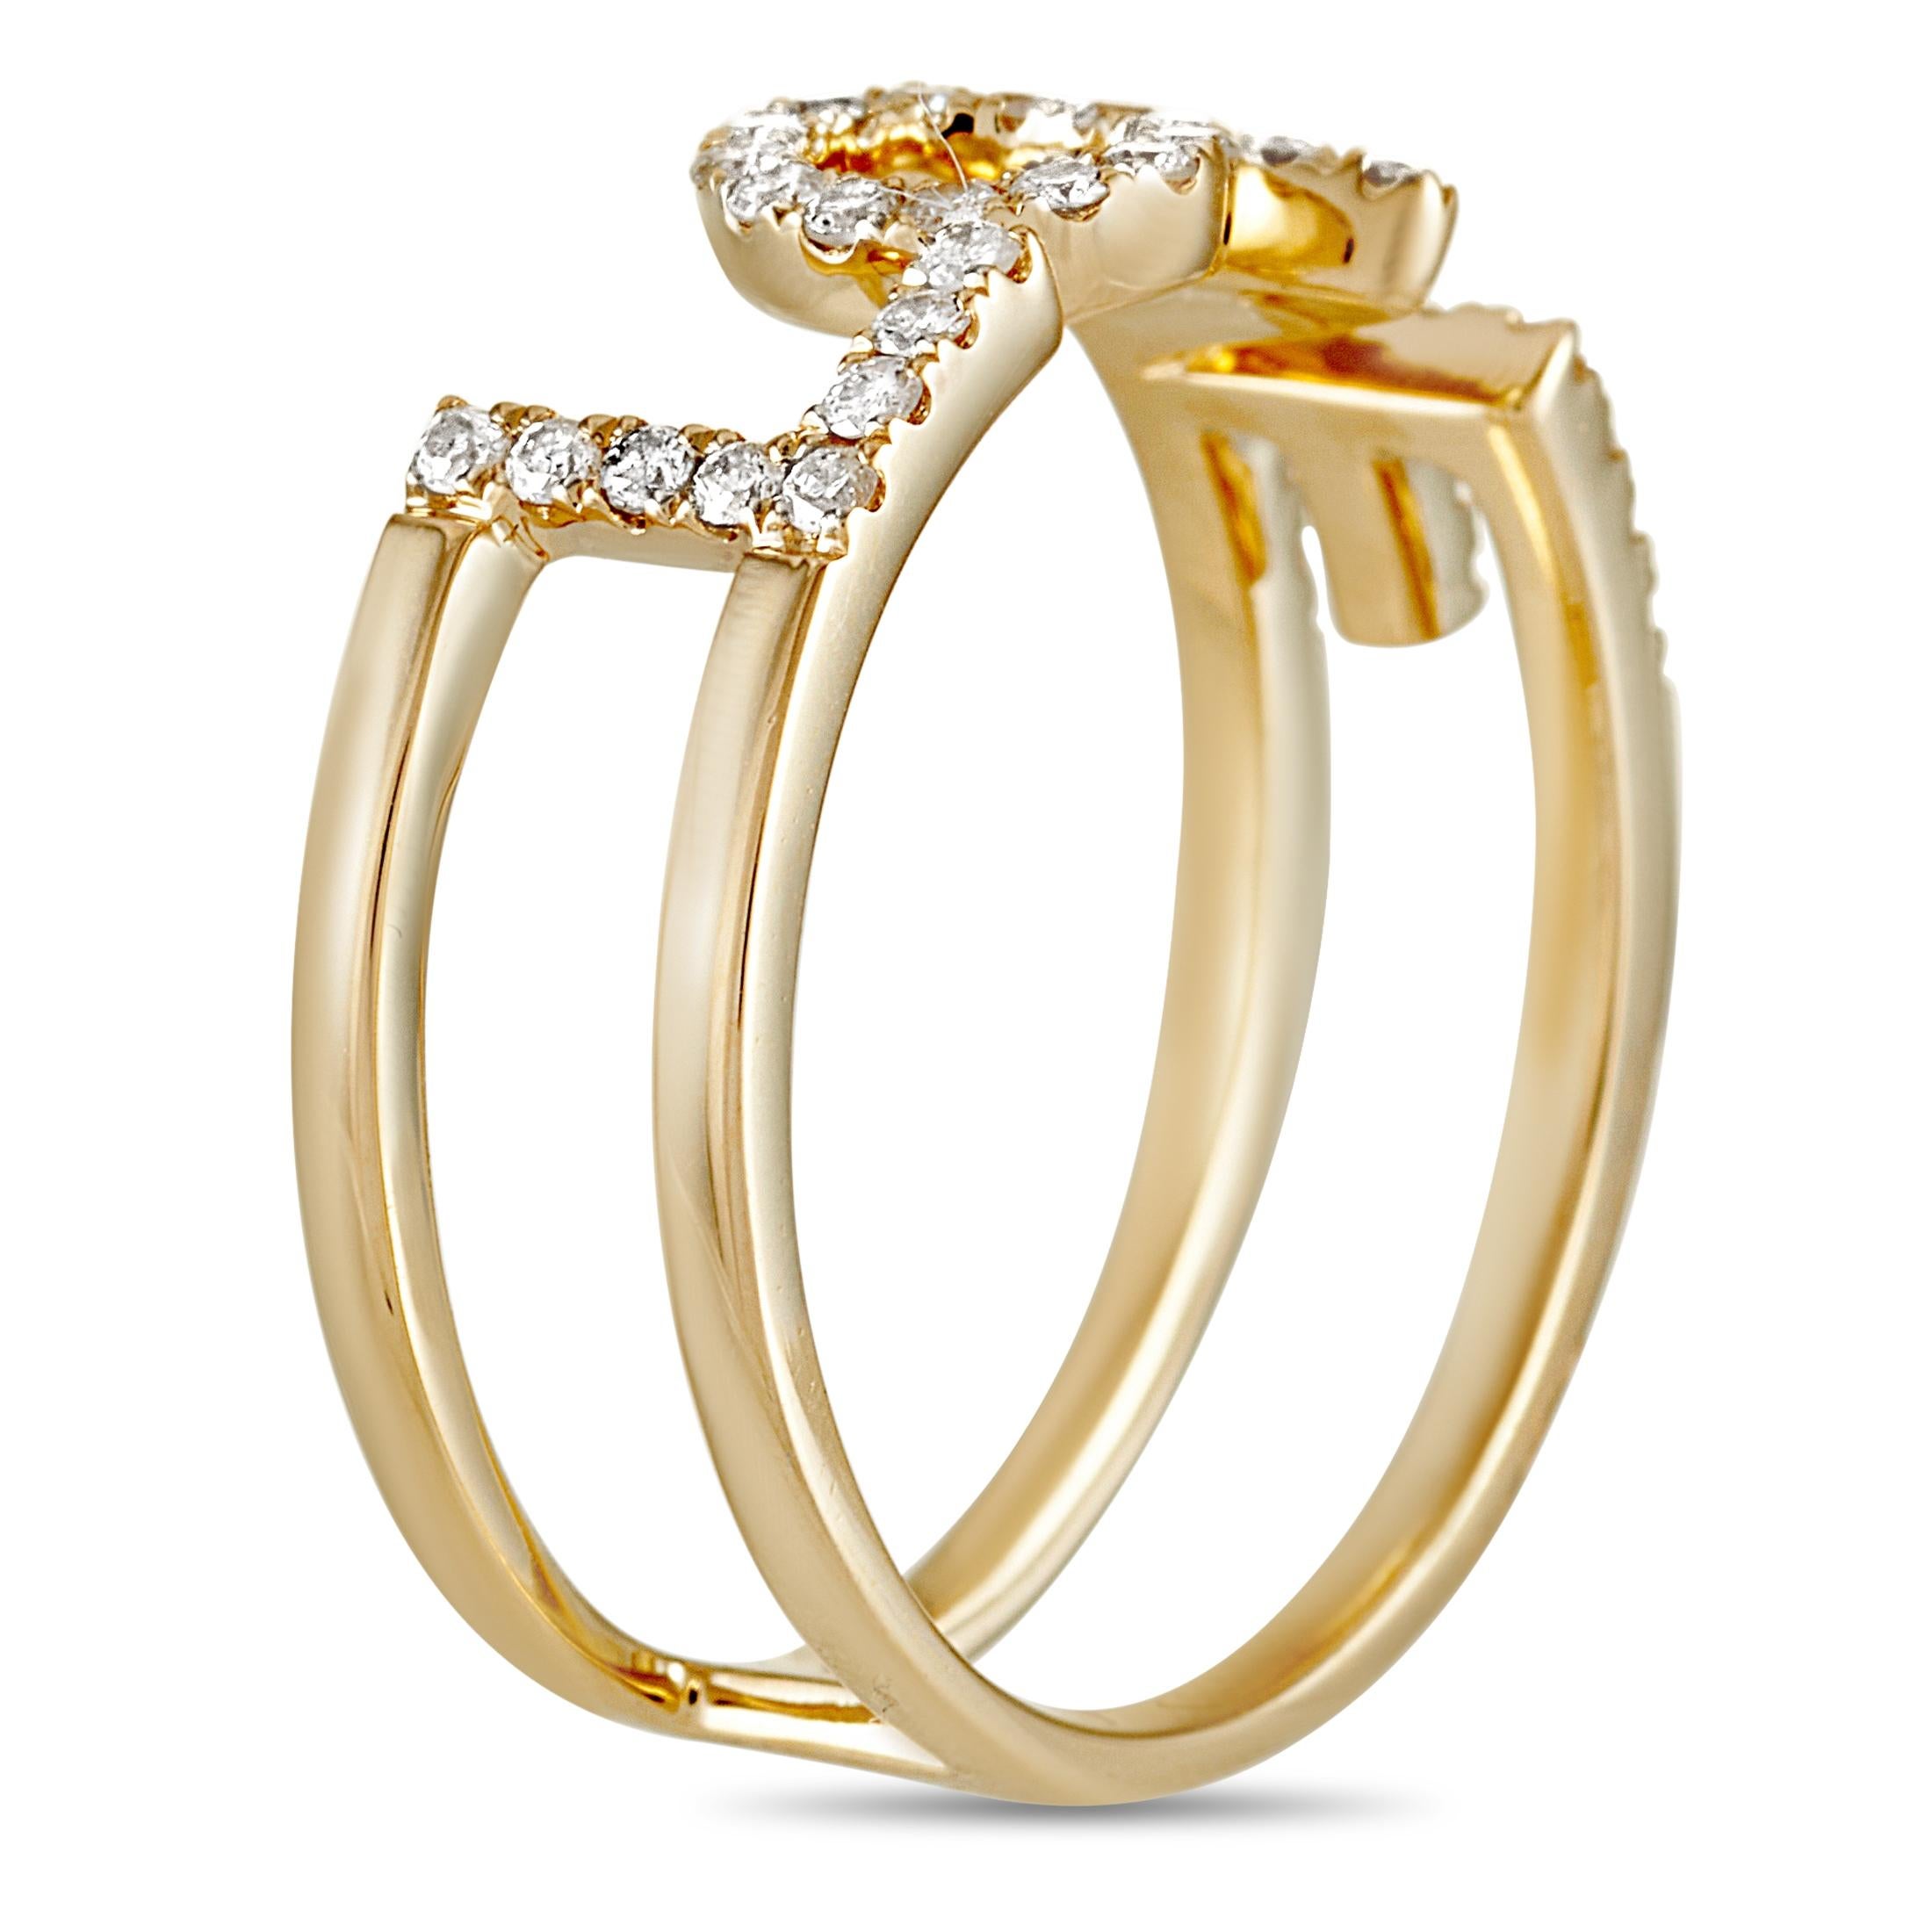 This LB Exclusive love ring is made of 14K yellow gold and embellished with diamonds that amount to 0.35 carats. The ring weighs 2.6 grams and boasts band thickness of 6 mm, while top dimensions measure 6 by 16 mm.
 
 Offered in brand new condition,